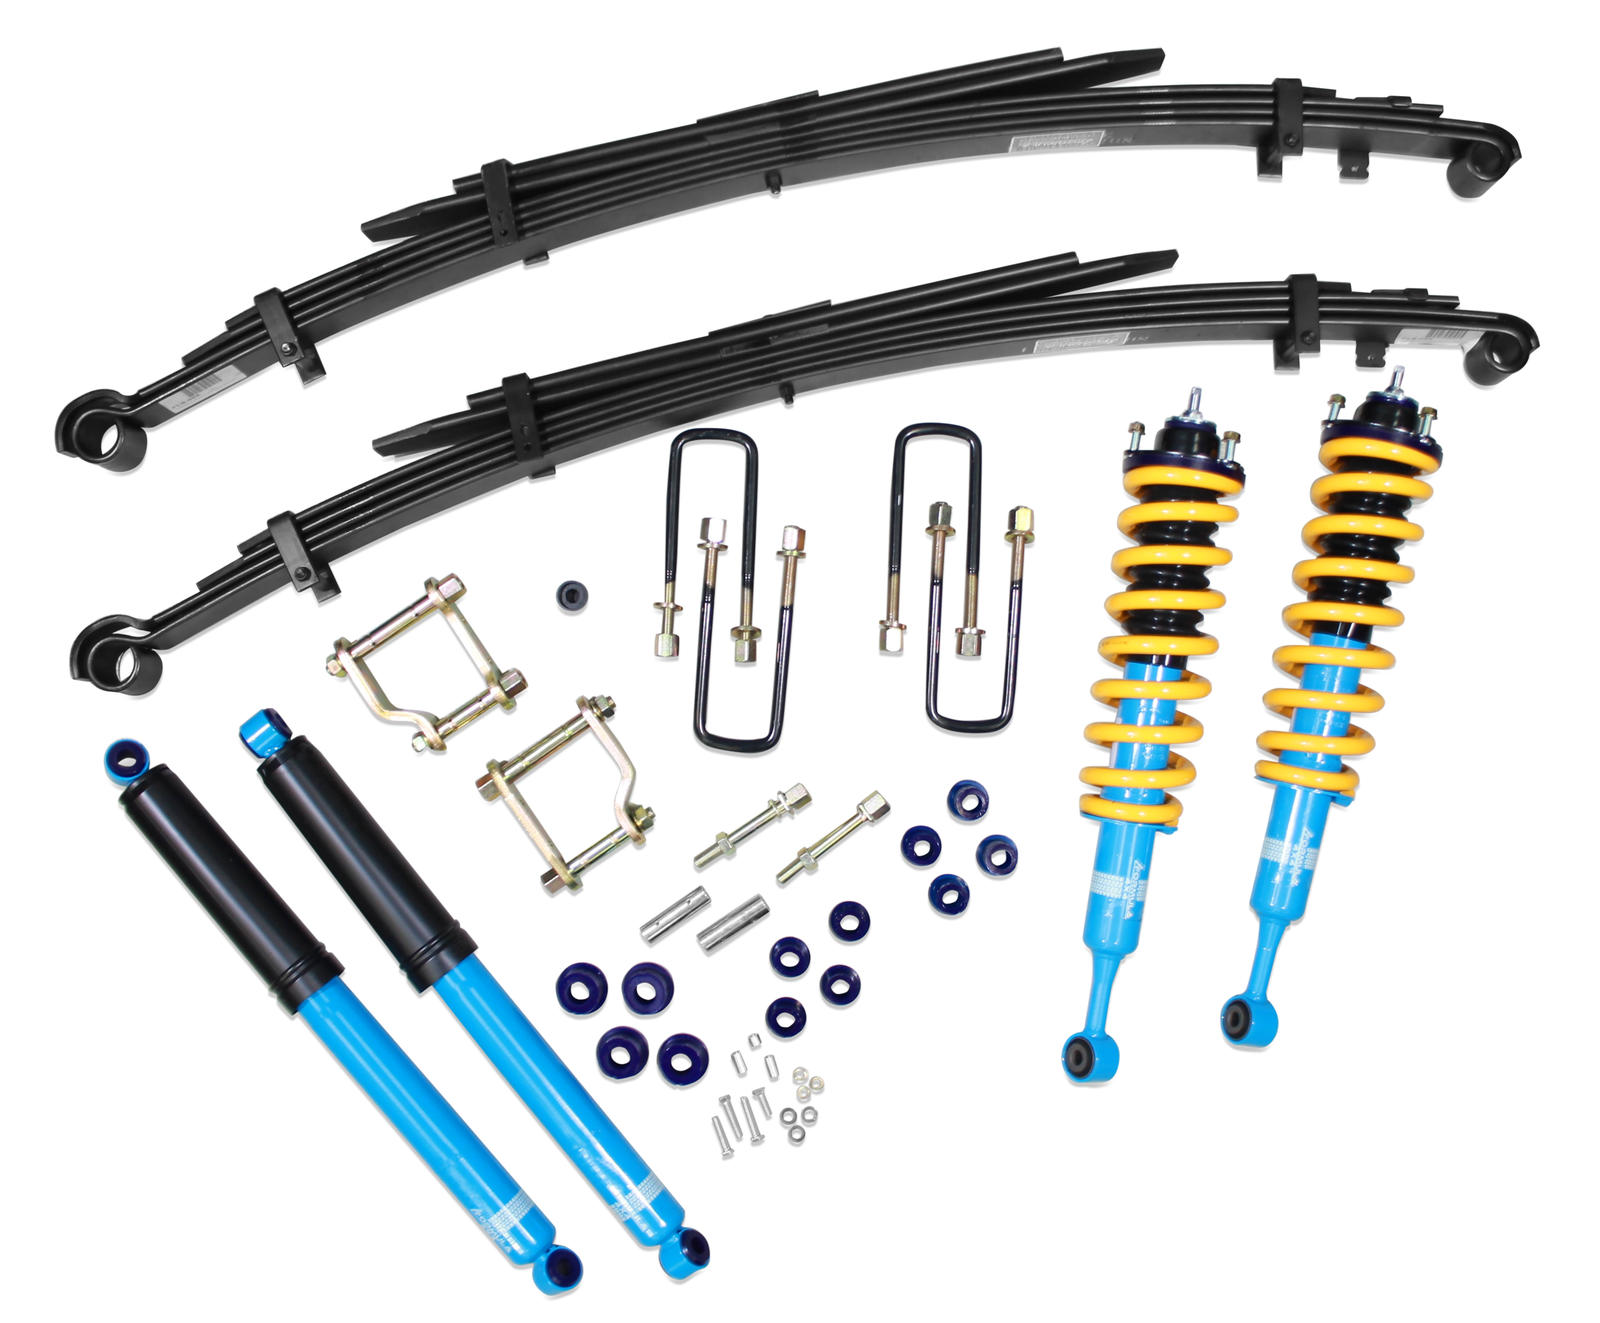 2 Inch 50mm Formula 4x4 ReadyStrut Lift Kit to suit Toyota Hilux GUN 2015-on - excluding 2022-on Rogue (wide-body) variants